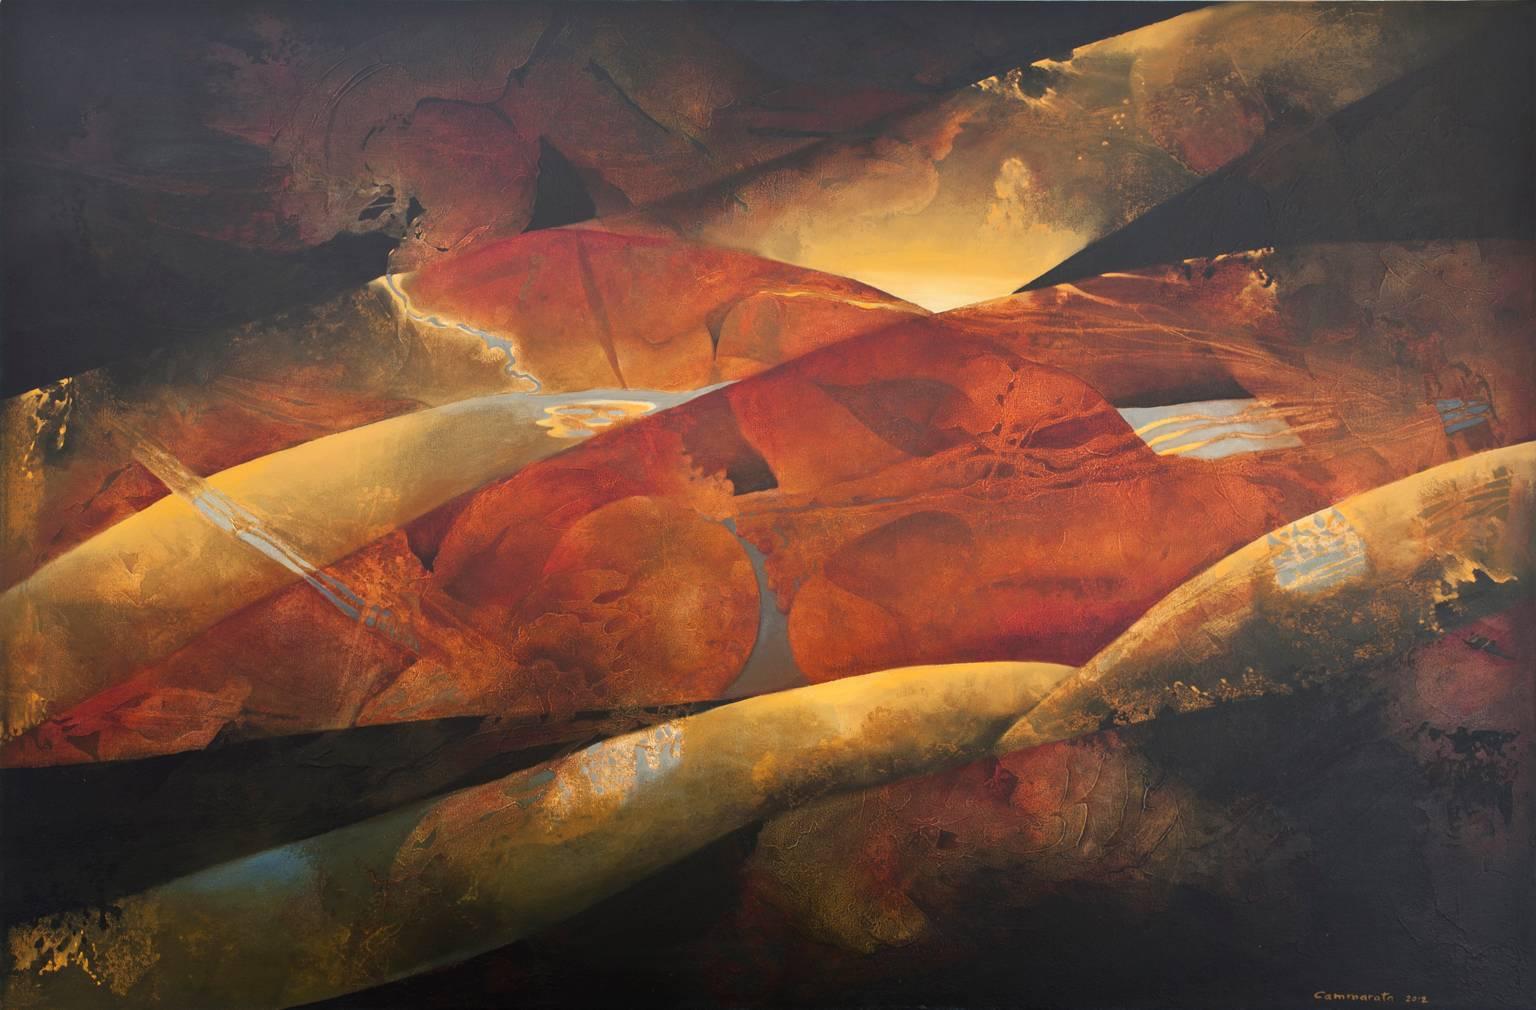 Kathleen Cammarata Abstract Painting - "Along The Dark Edges"- Red oxide, rectangular abstract painting, oil on canvas.